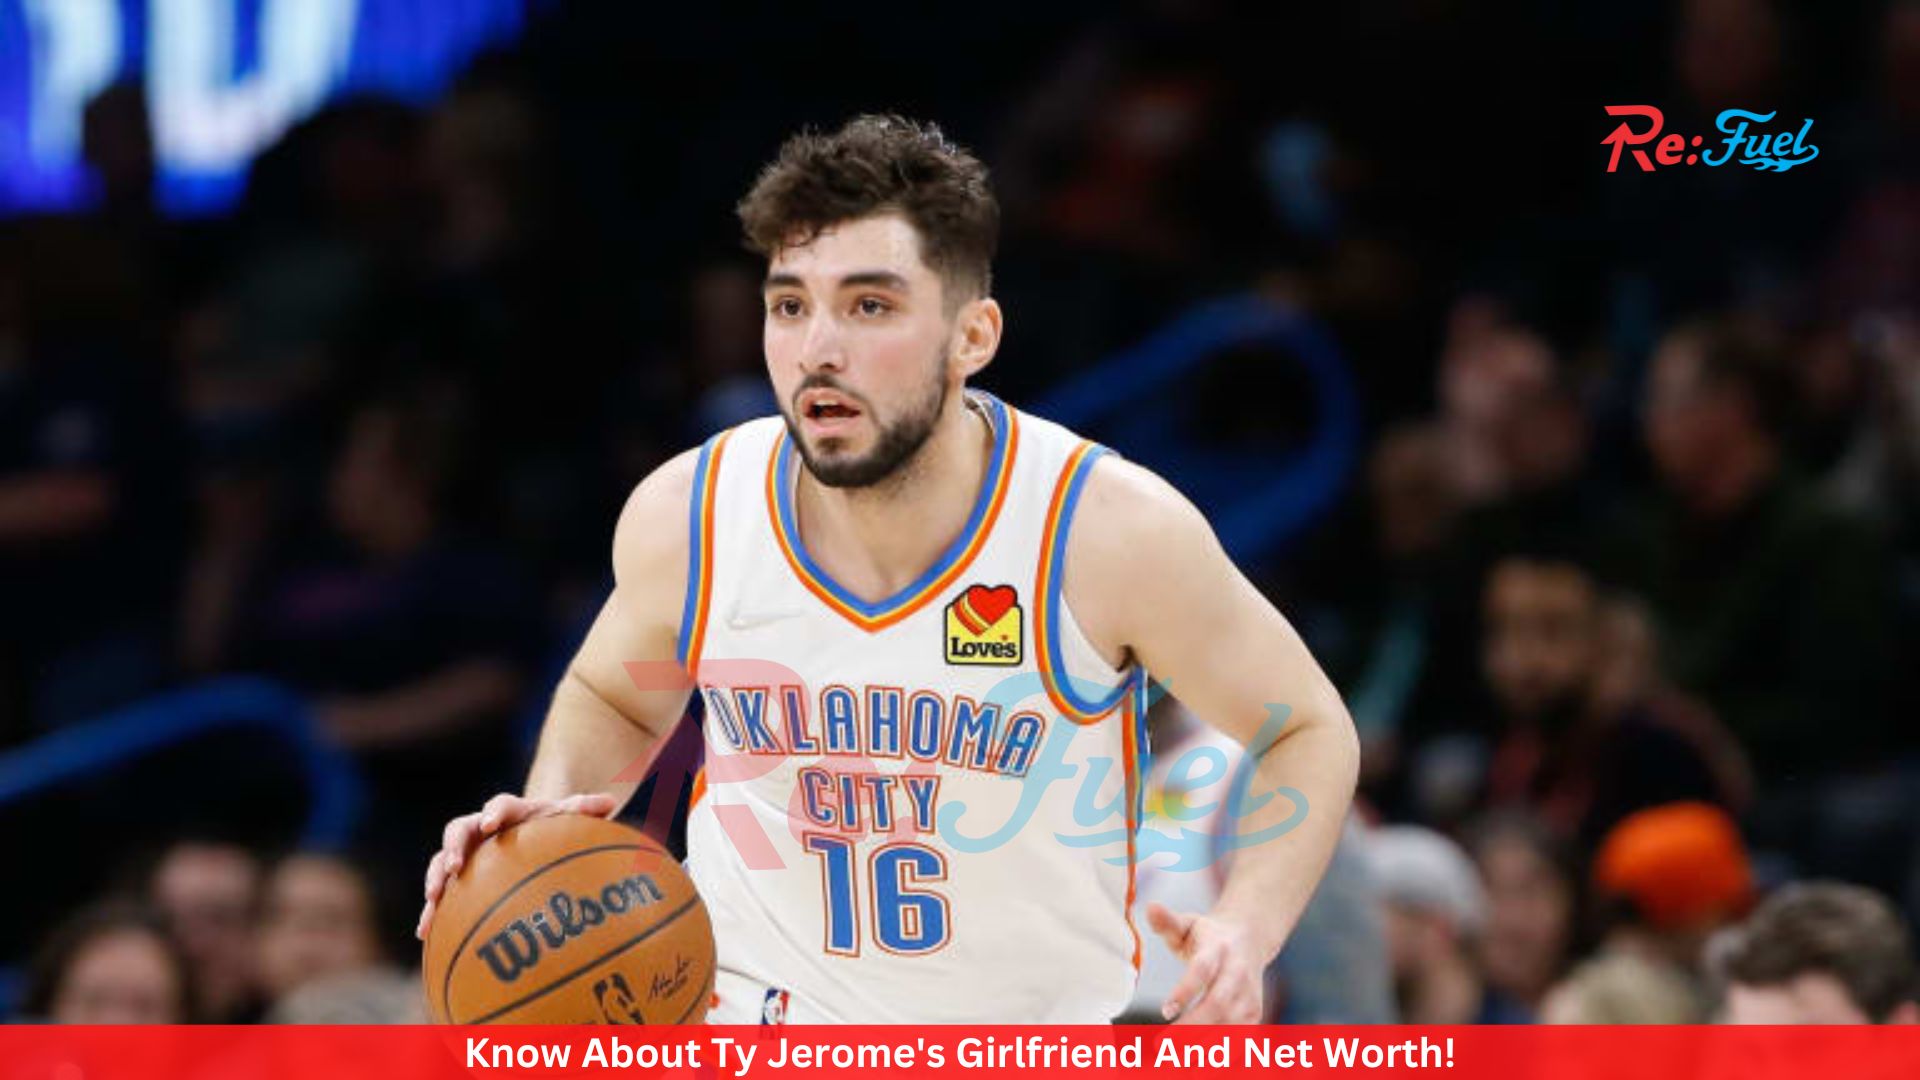 Know About Ty Jerome's Girlfriend And Net Worth!